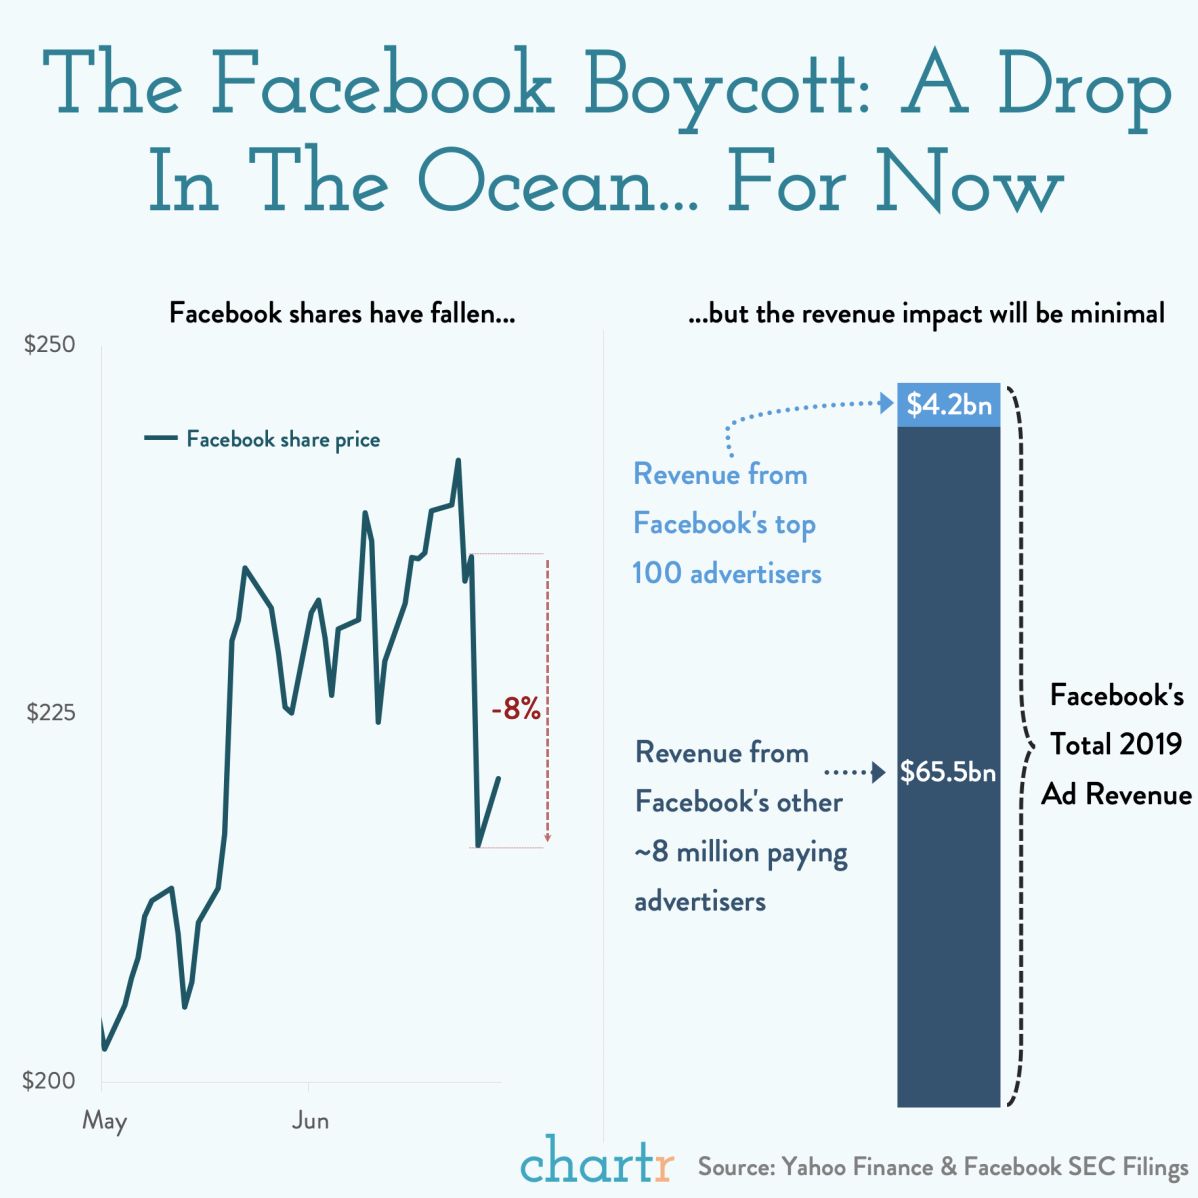 Two graph representations of effects of Facebook Boycott on share price (8% decrease) and revenue impact ($4.2 billion)